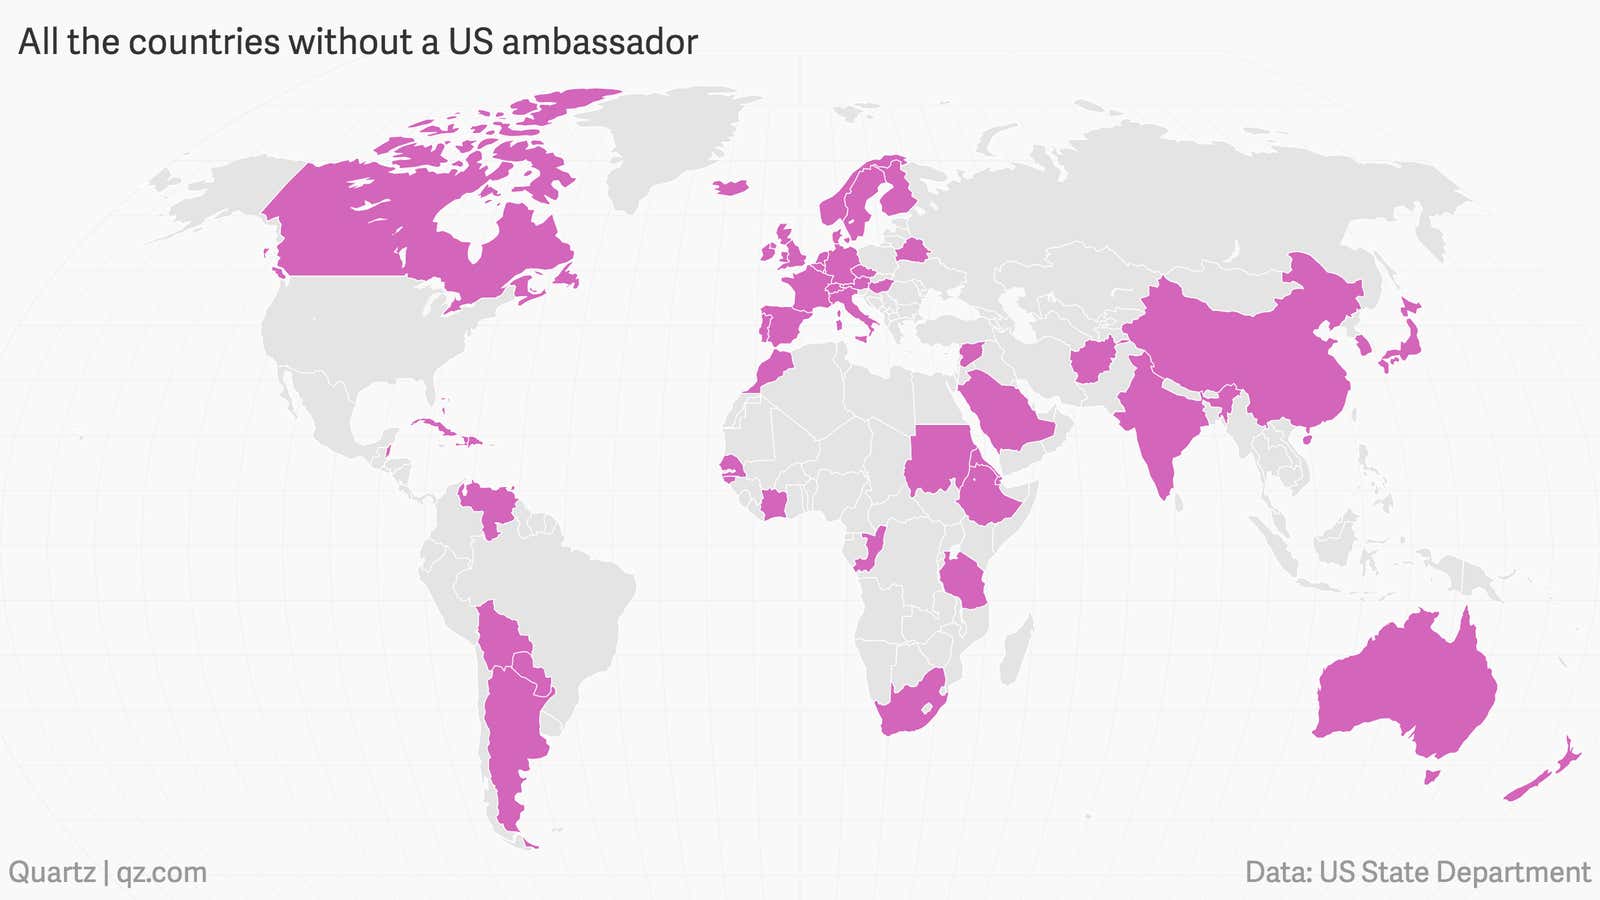 More than half the world’s population still doesn’t have a US ambassador